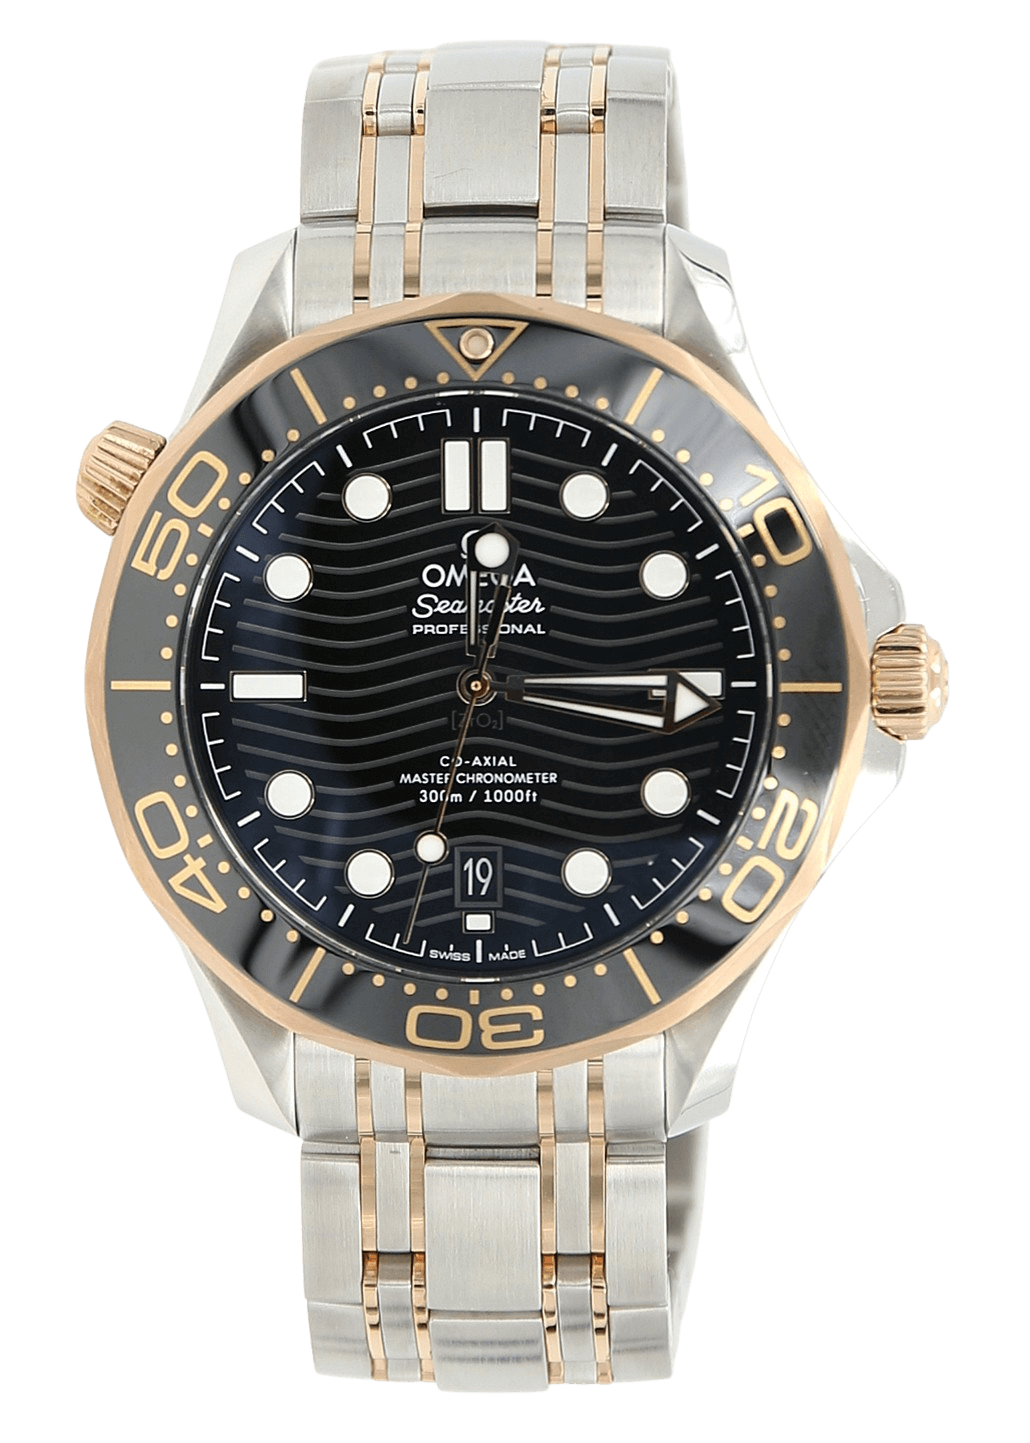 Omega Seamaster Co-axial ref. 210.20.42.20.01.001 Steel/Gold